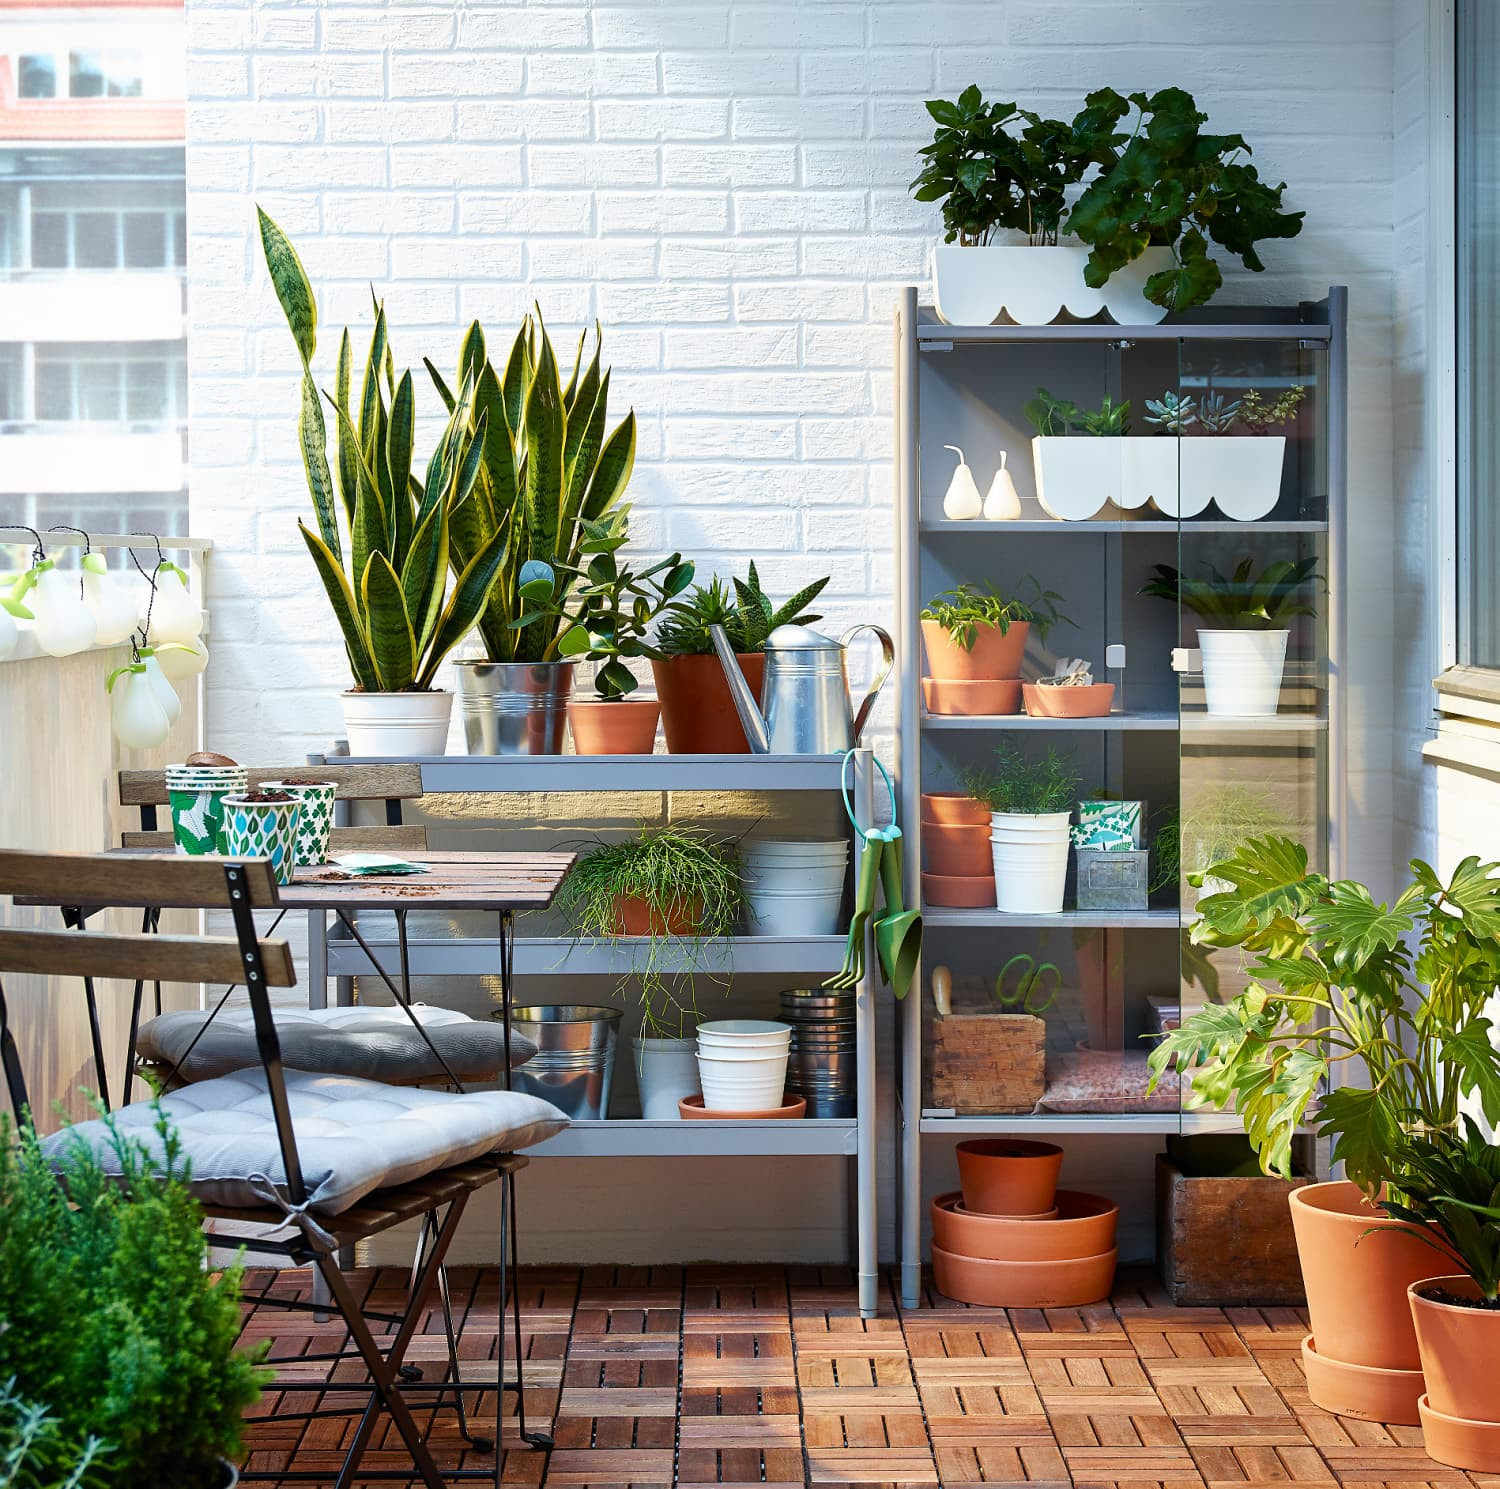 Ikea Outdoor Kitchen
 Sale at IKEA Right Now Kitchen Outdoor and More